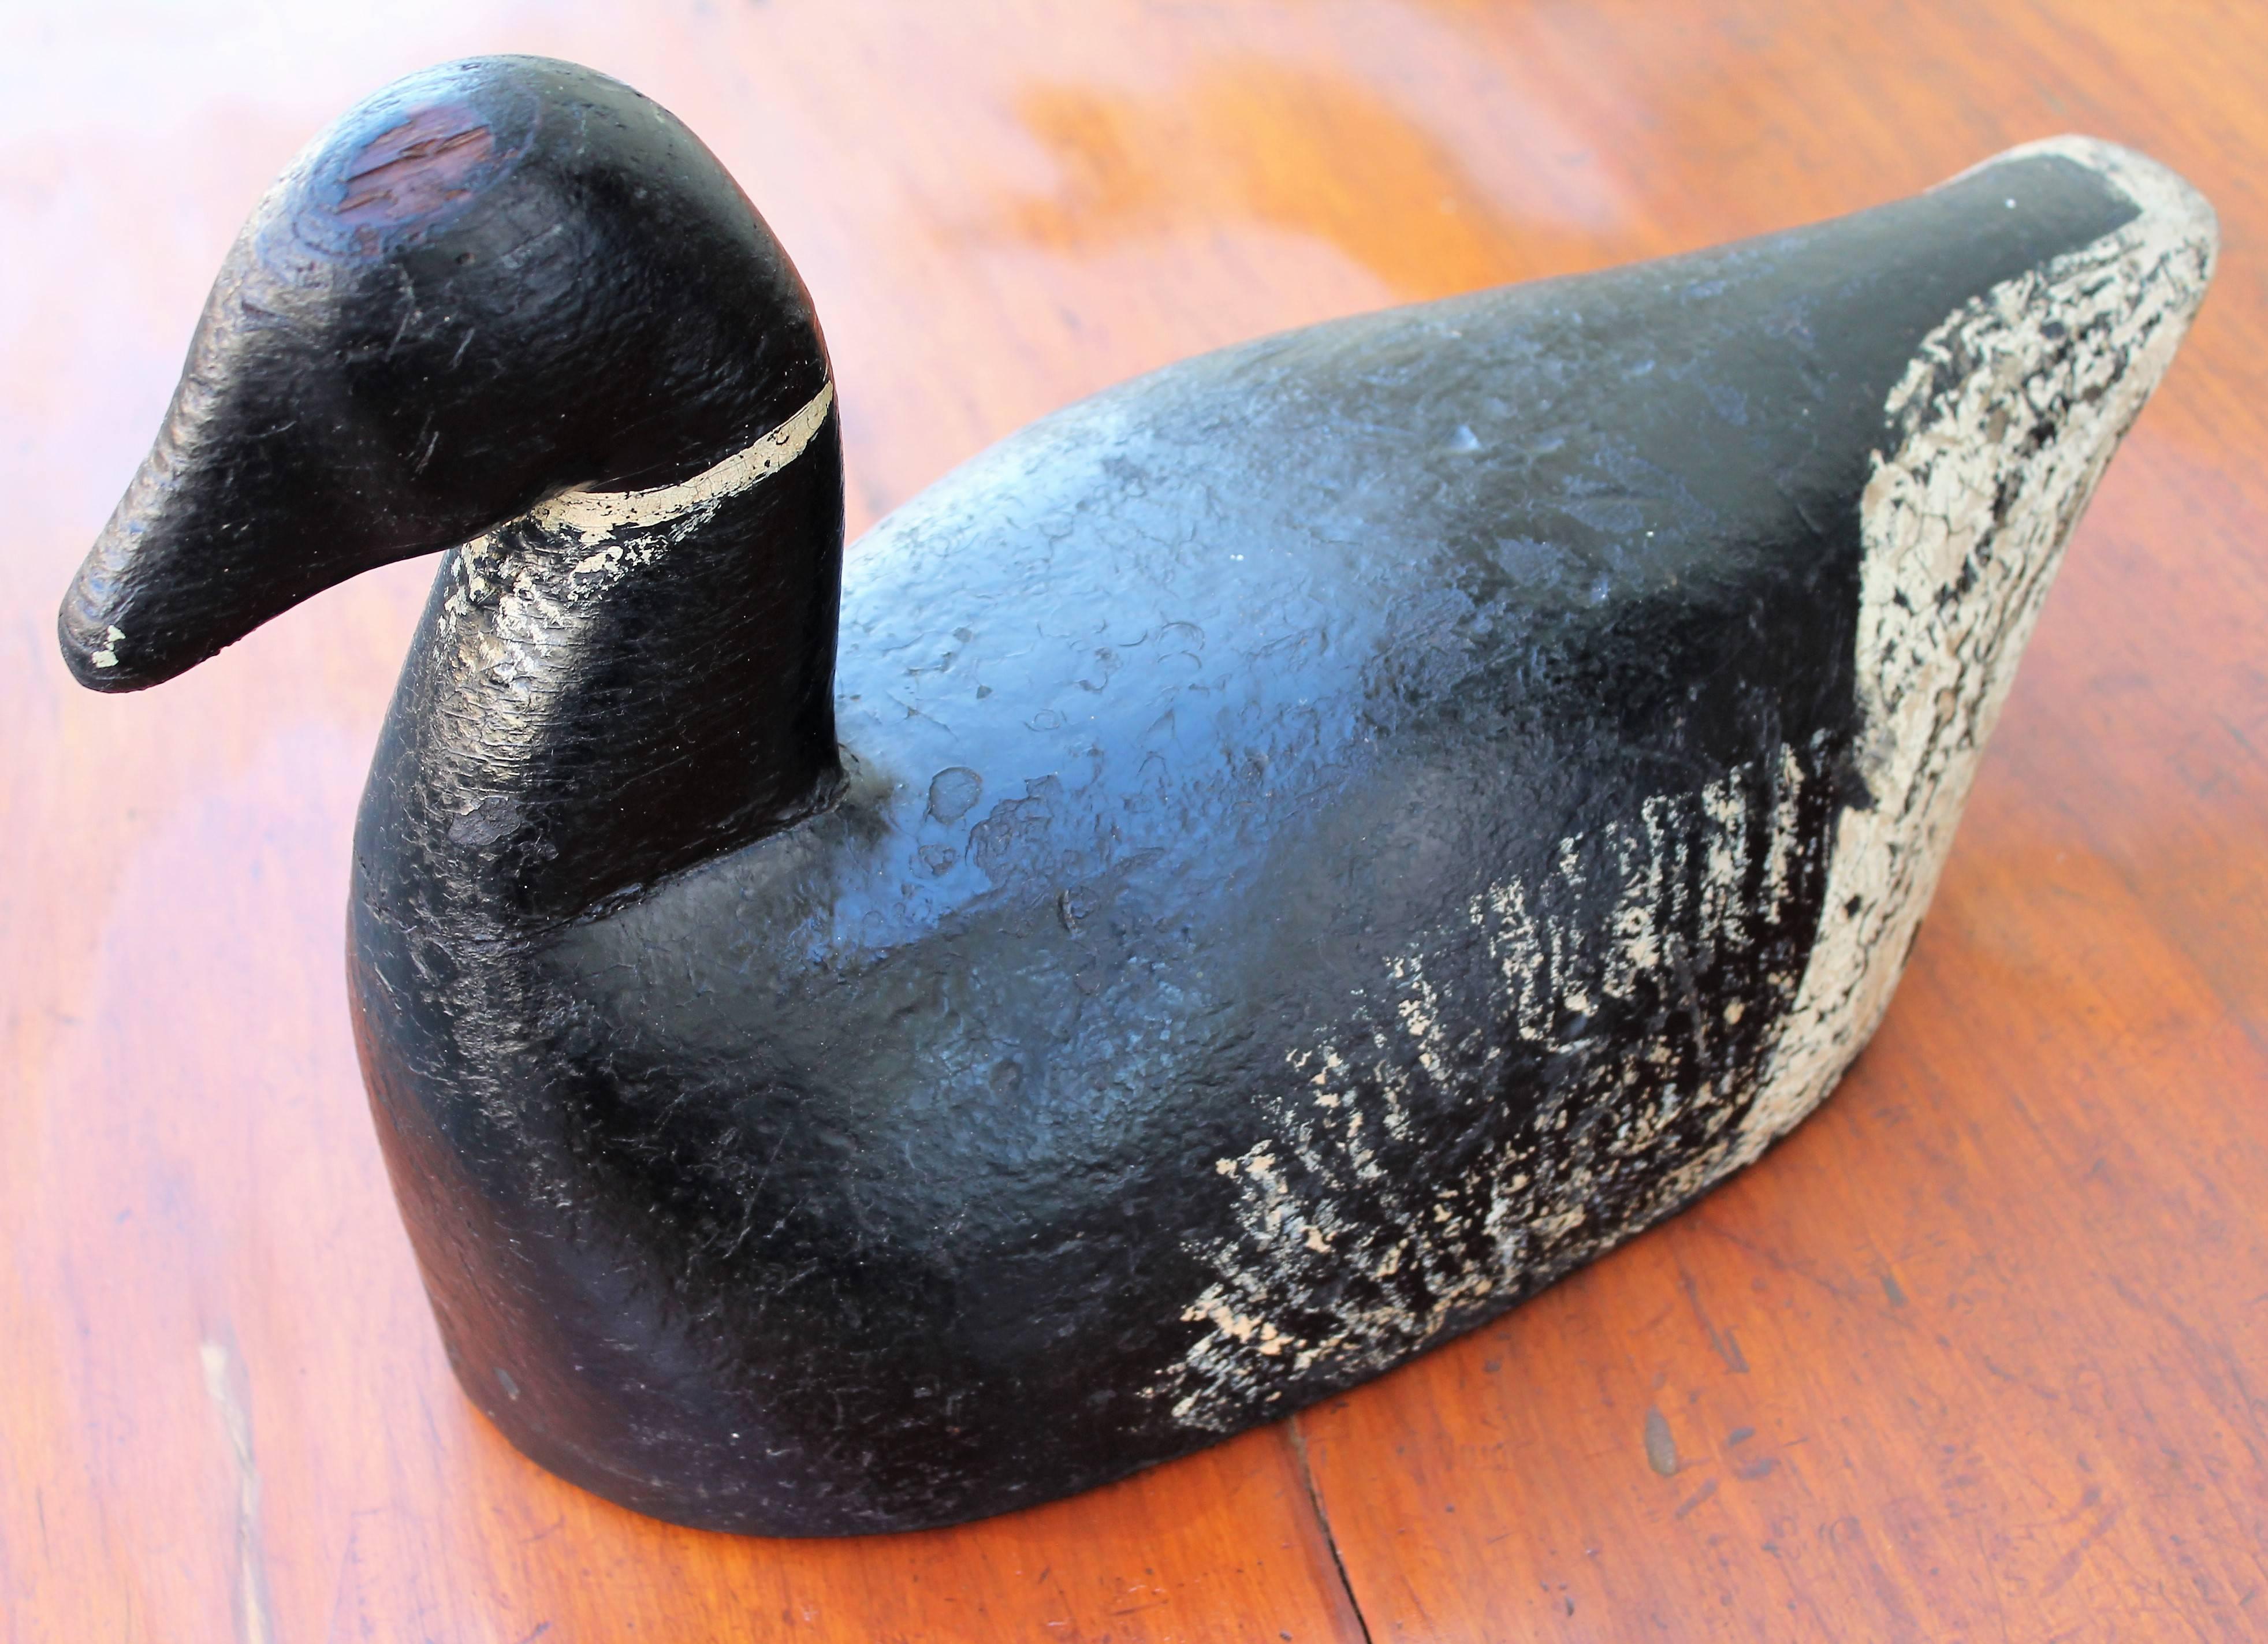 Early 20th century original painted large Canadian goose from the collection of Harry Walsh purchased in Easton, Pennsylvania. This was made in Virginia. The condition is very good with missing paint and weights on base. This is common from age and